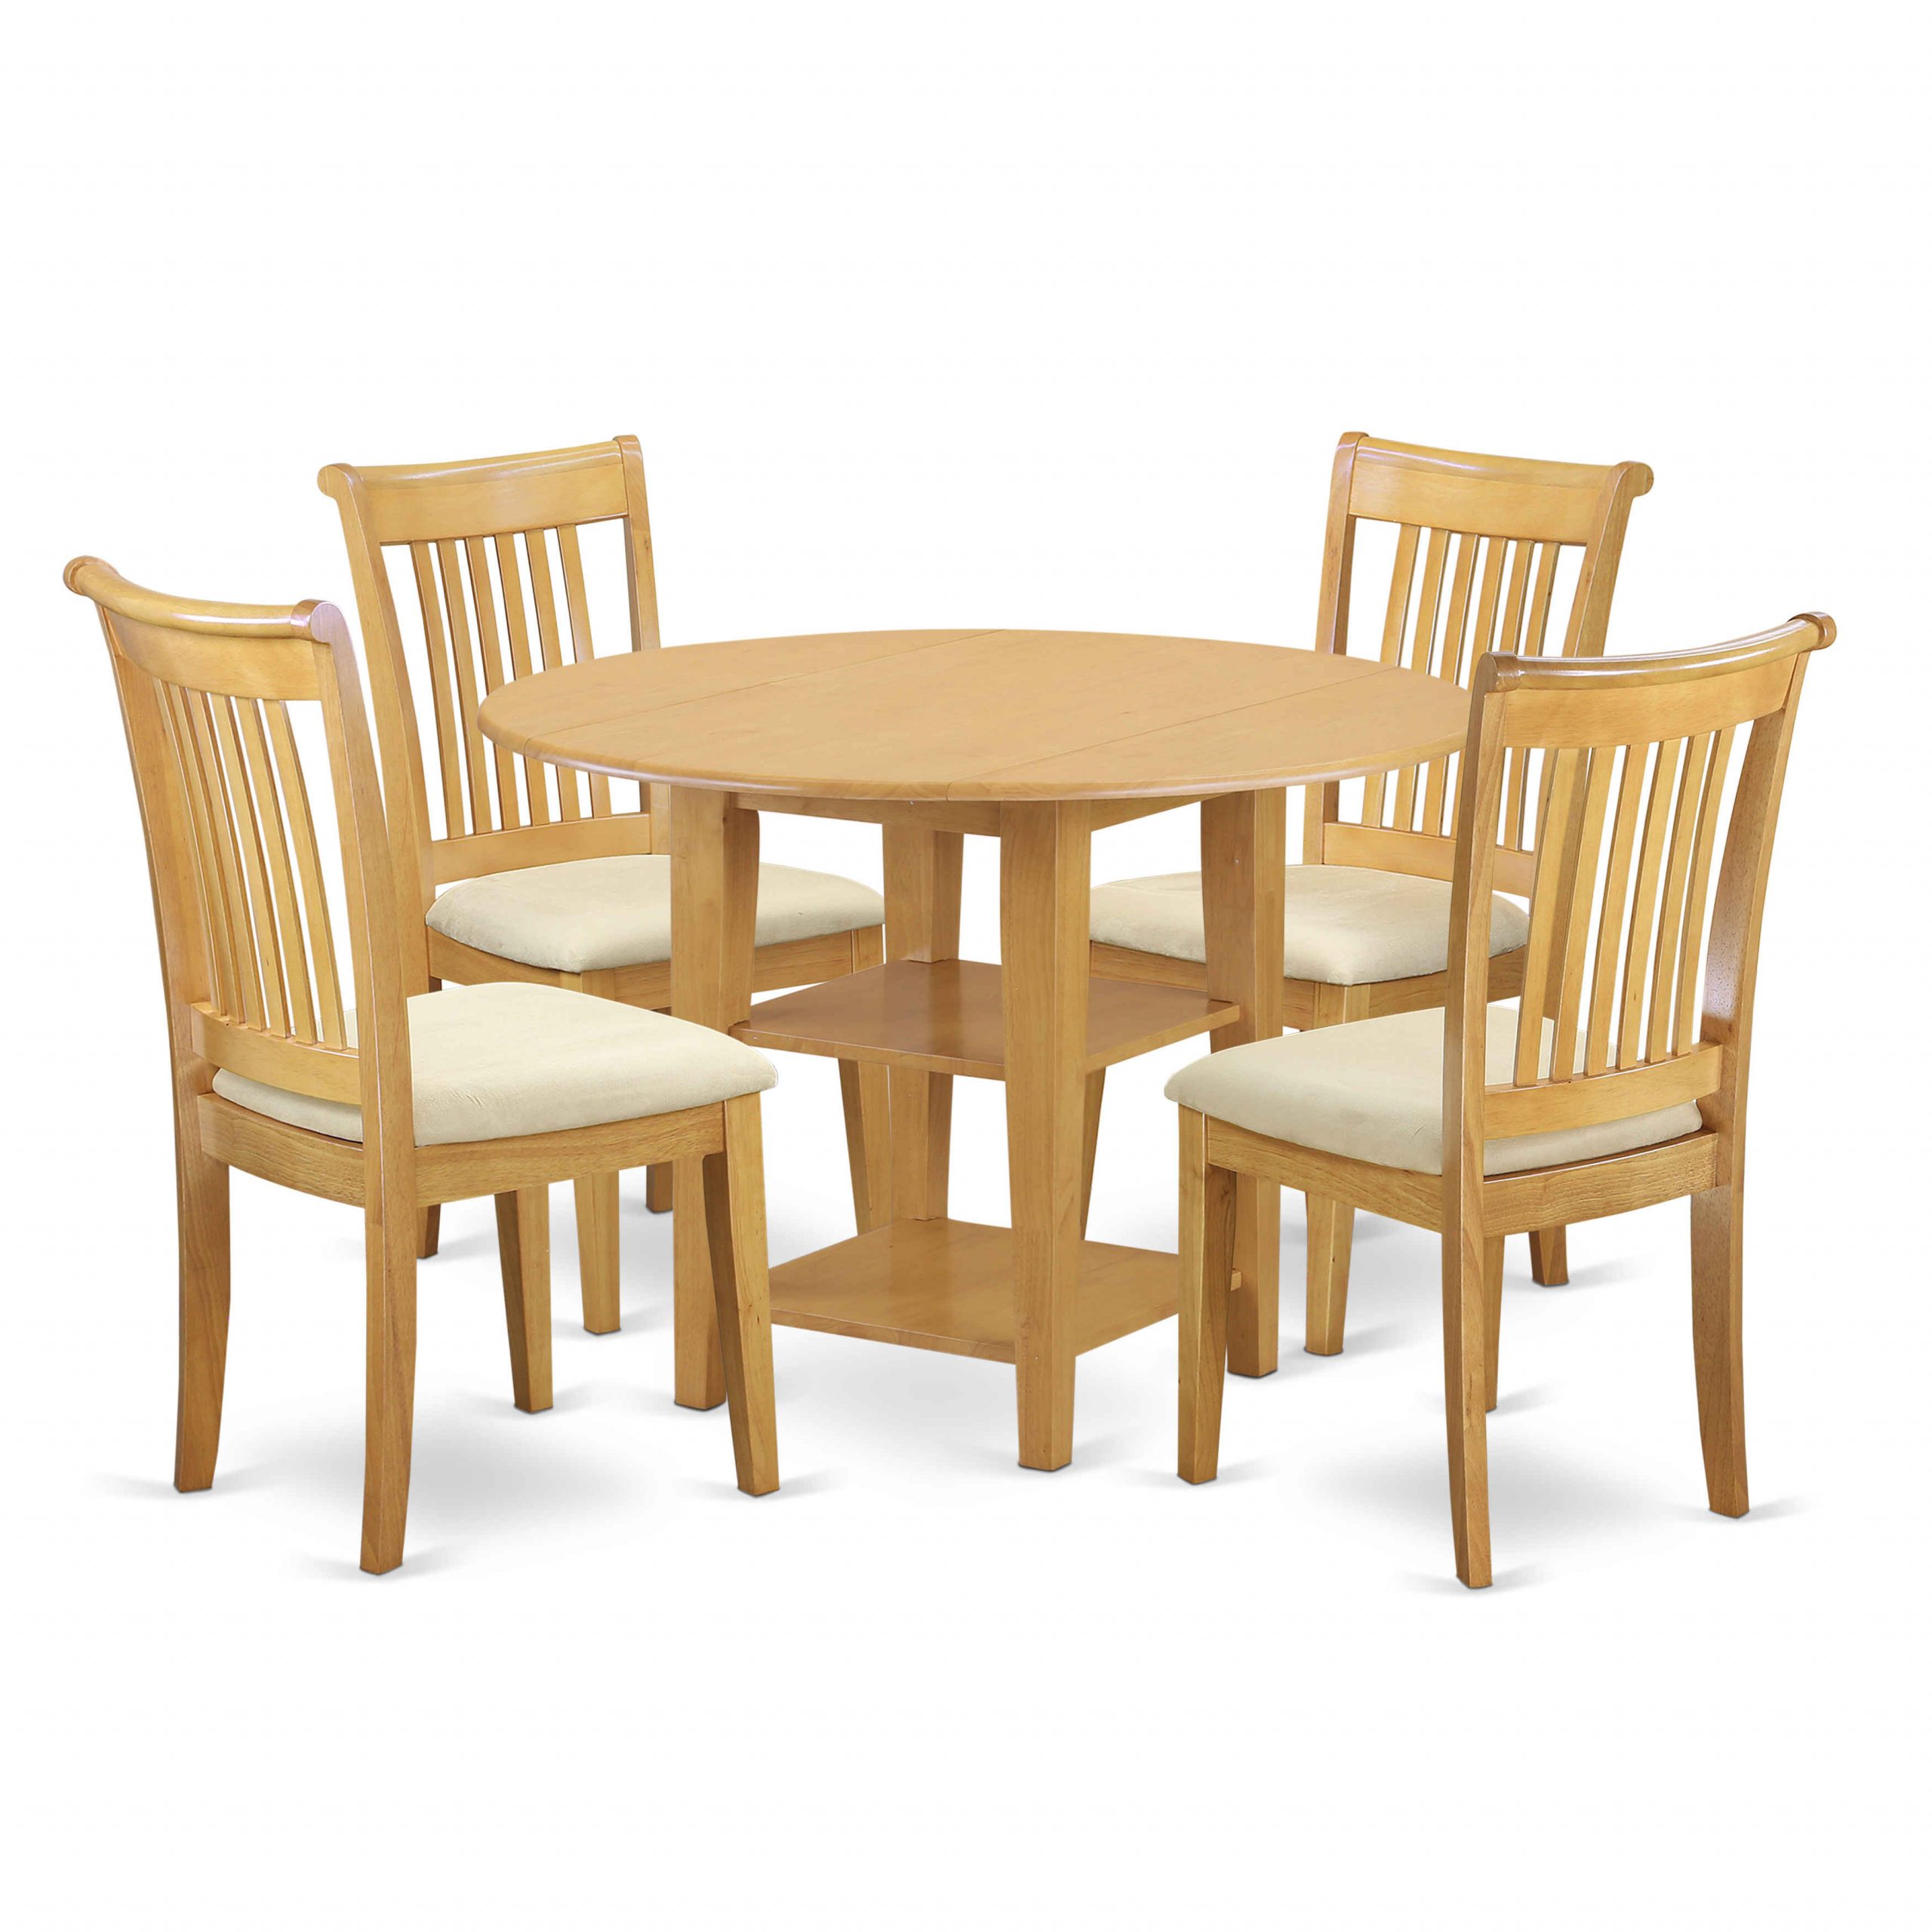 Tag Archived Of Dining Room Table Sets At Rooms To Go with regard to size 3500 X 3500